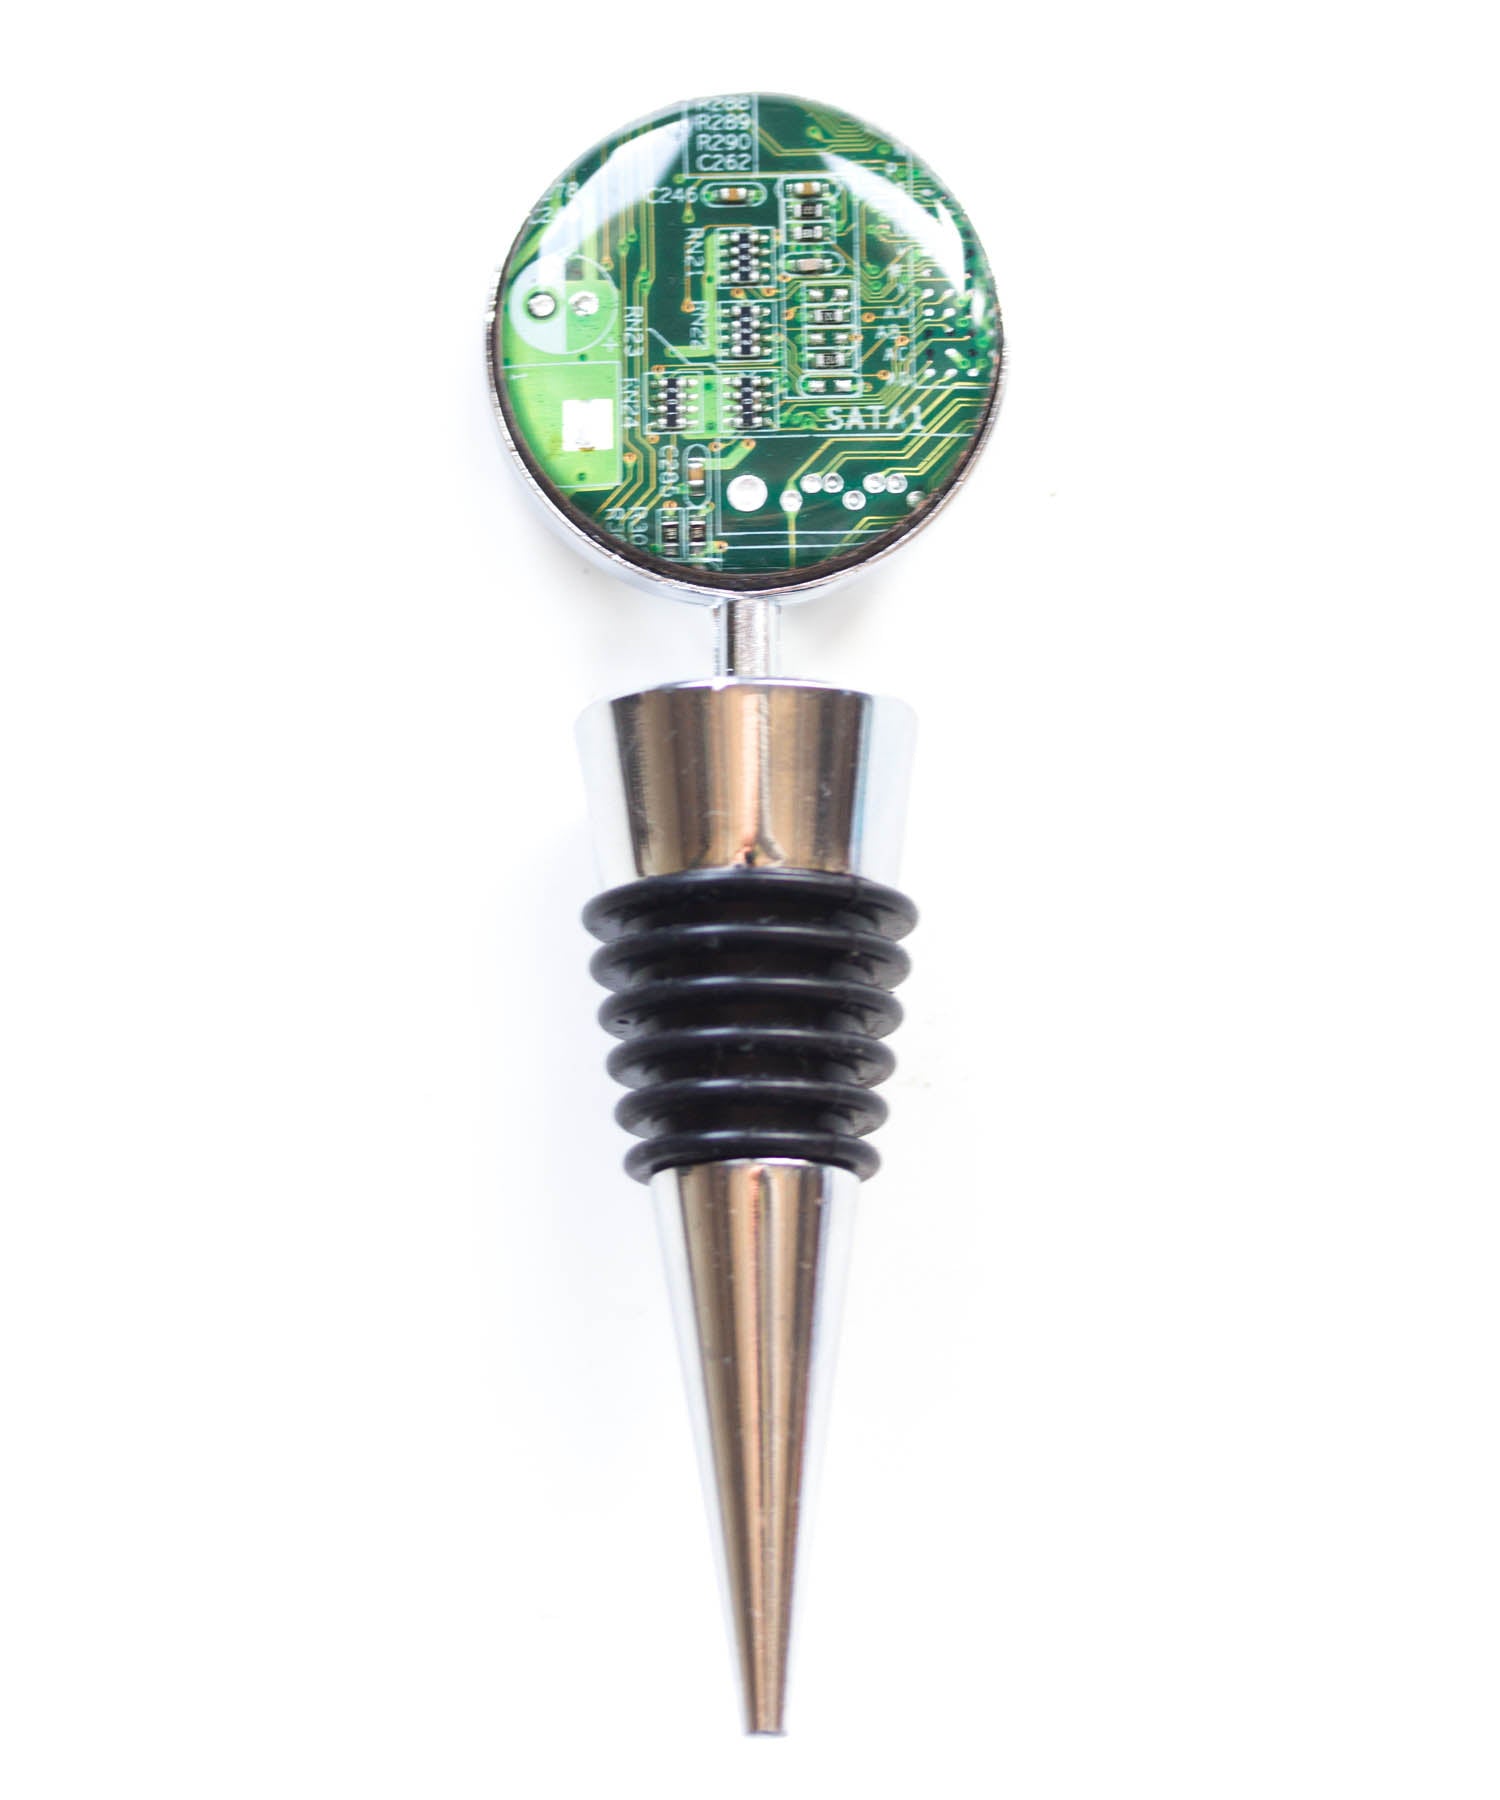 Wine Bottle stopper with a circuit board piece, groomsmen gift, custom color, wine lover gift